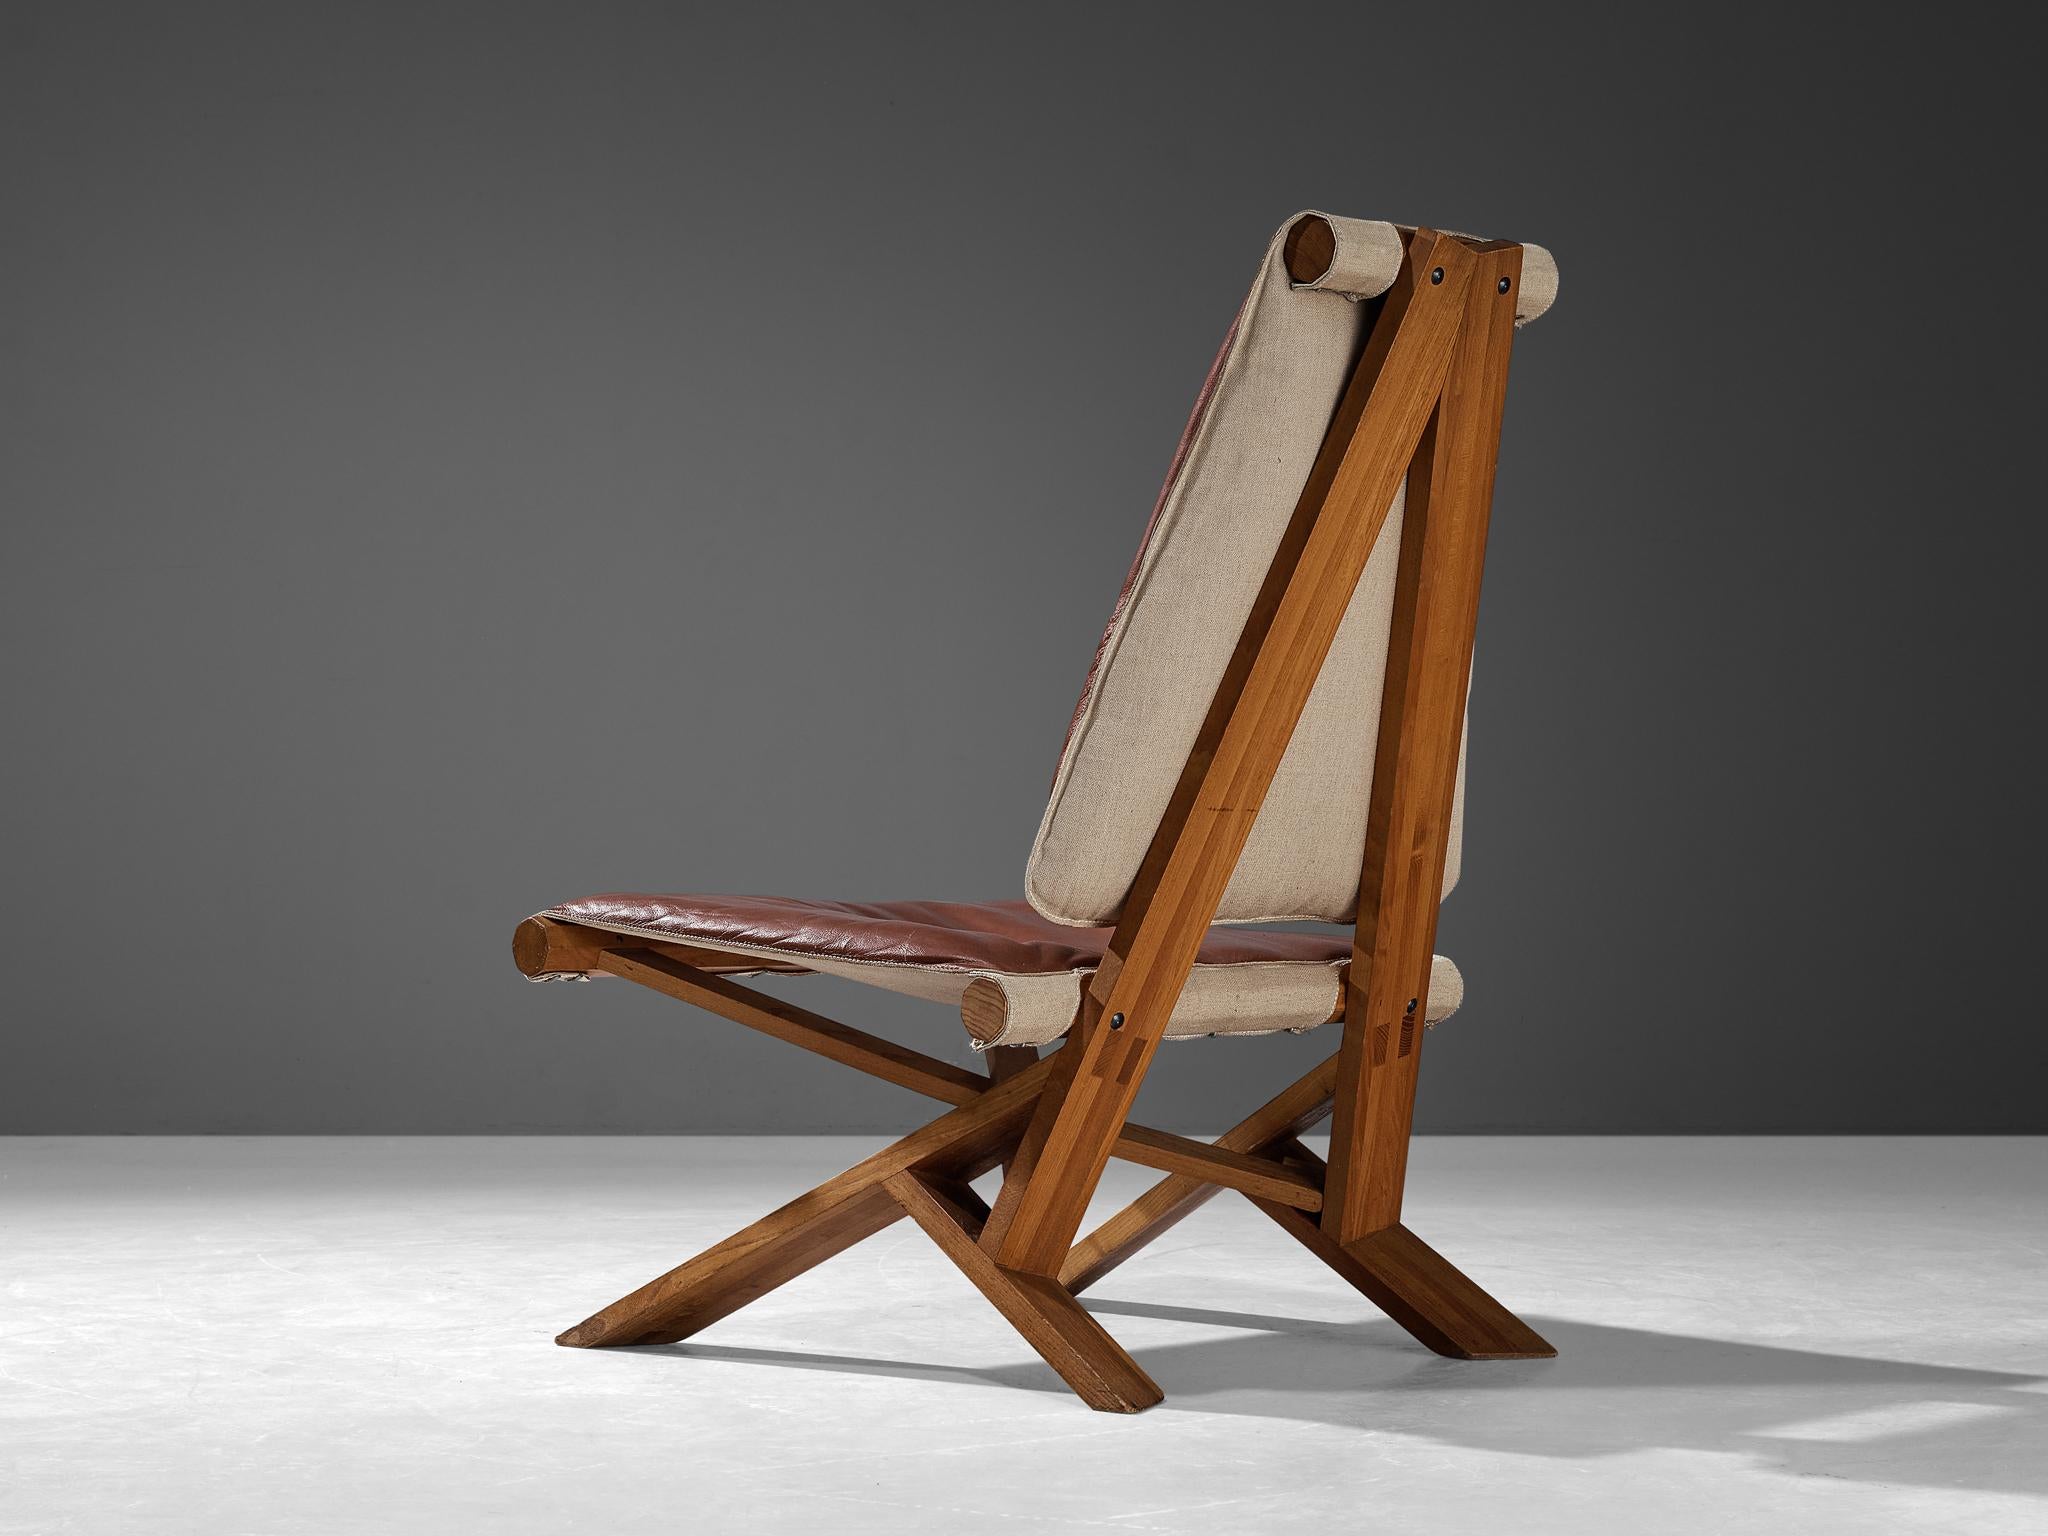 Pierre Chapo 'S46' lounge chair, leather, elm, France, 1979

This design is an early edition, created according to the original craft methodology of Pierre Chapo. Pierre Chapo designed the 'S46' with the same principles as the 'Chlacc' chair